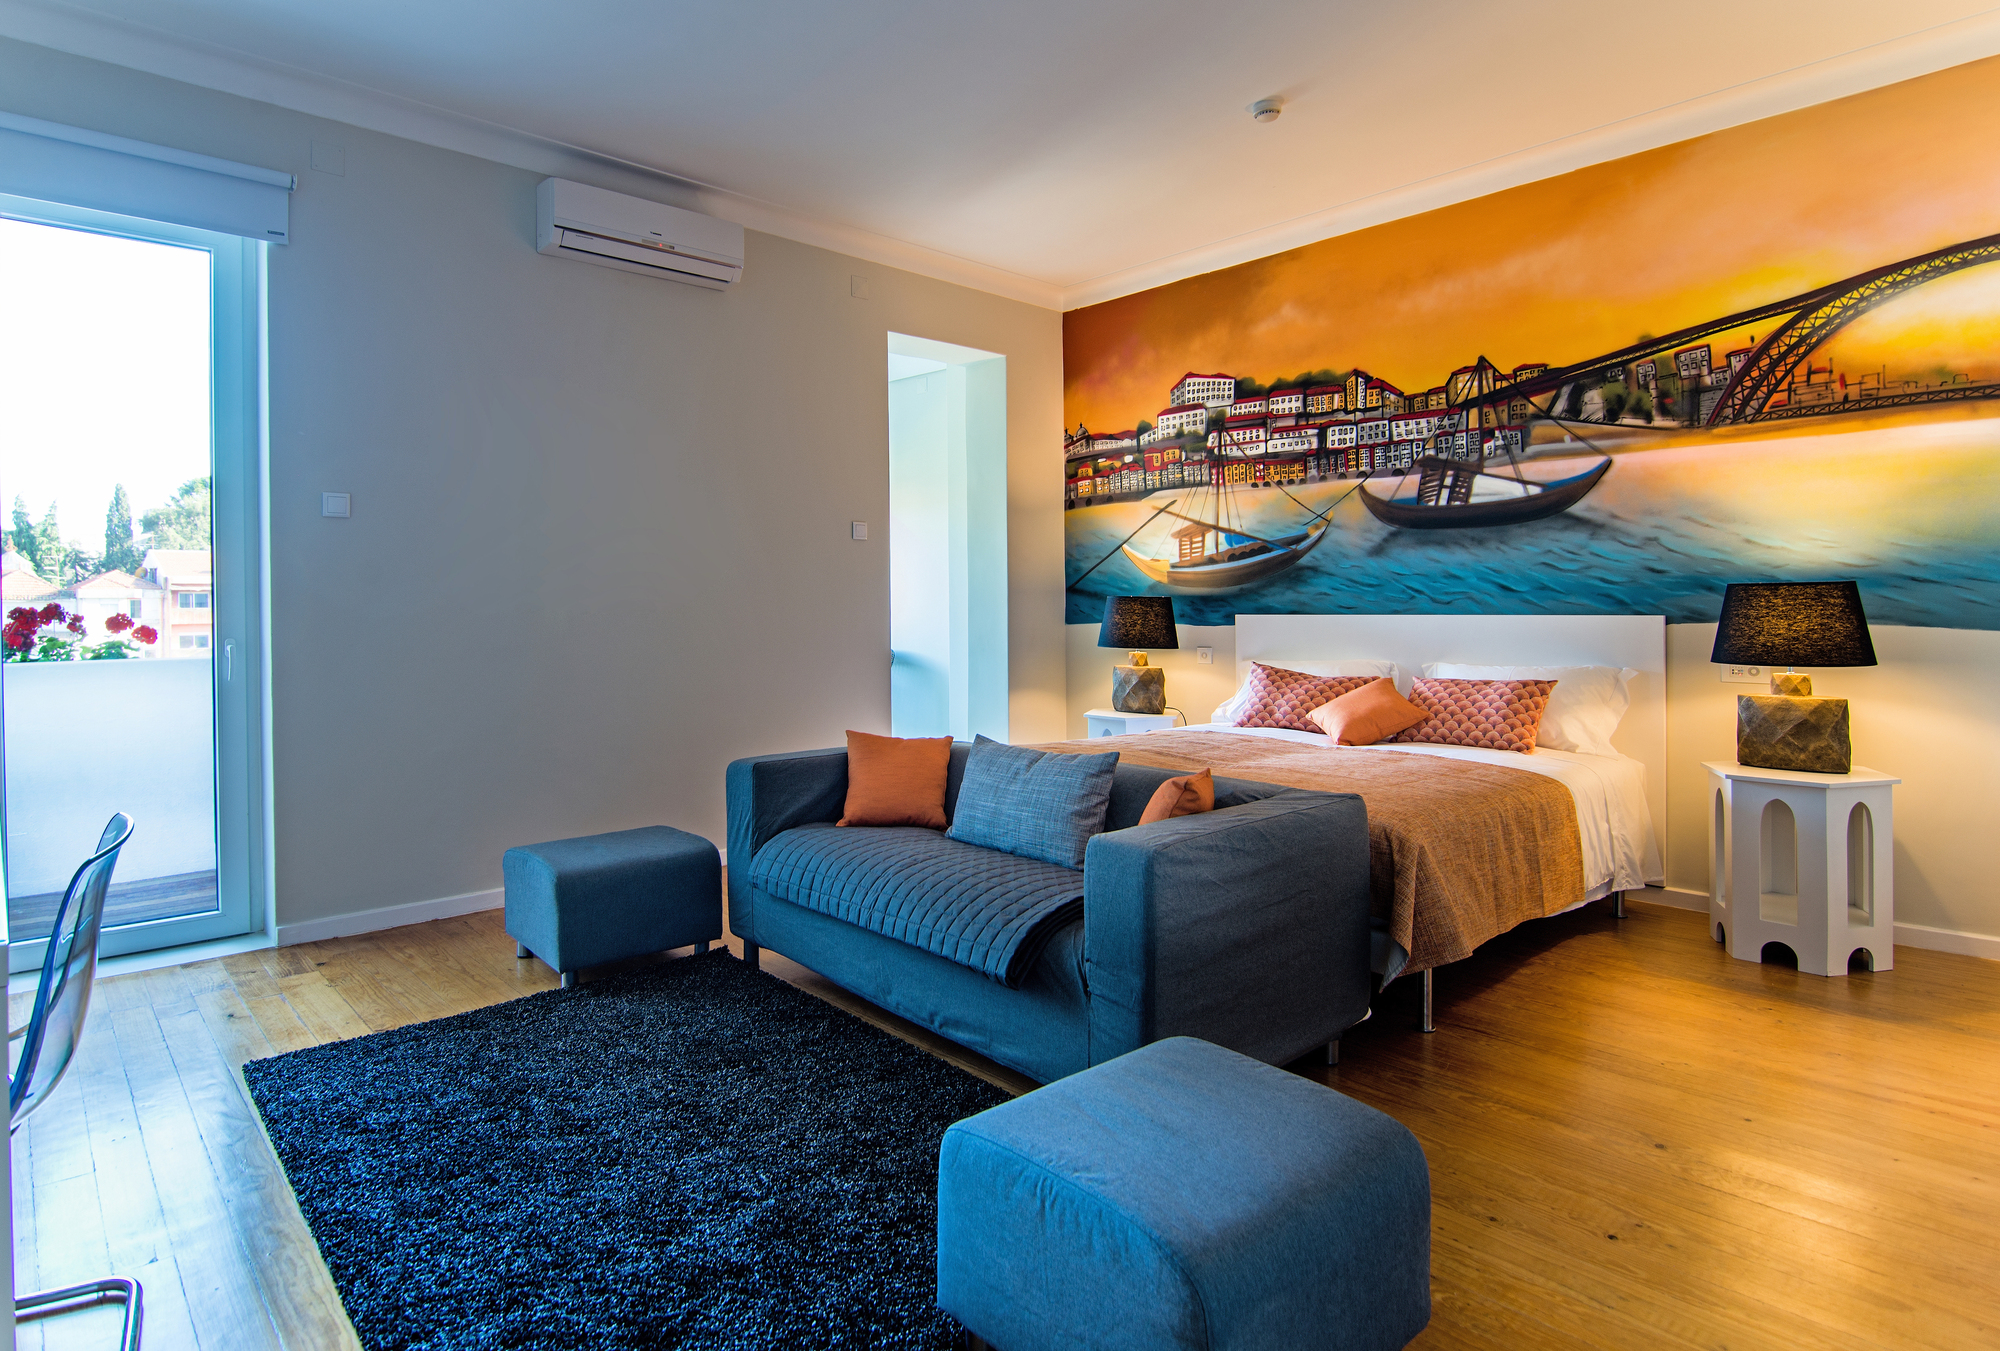 A sleek deluxe suite at the Gallery Hostel in Porto, Portugal.